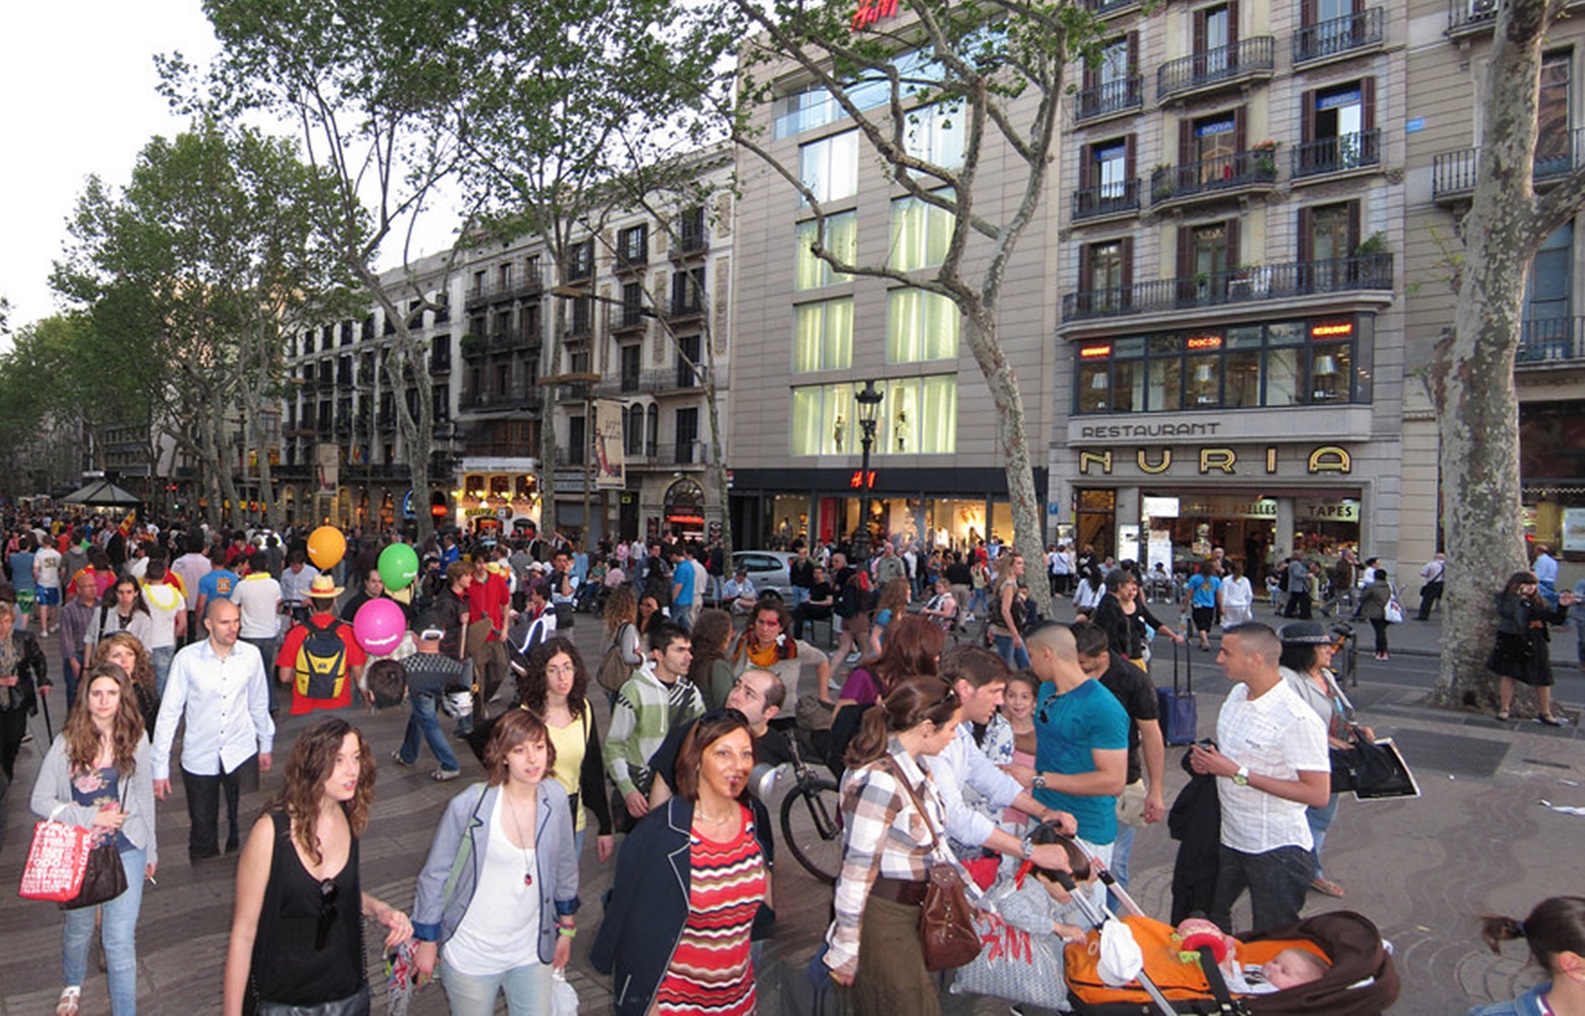 <p>If you do choose to visit La Ramblas make sure to keep an eye on bag or purse. <strong>The street has a reputation for pickpockets,</strong> who often operate unnoticed amidst the chaos of the busy crowds.</p>